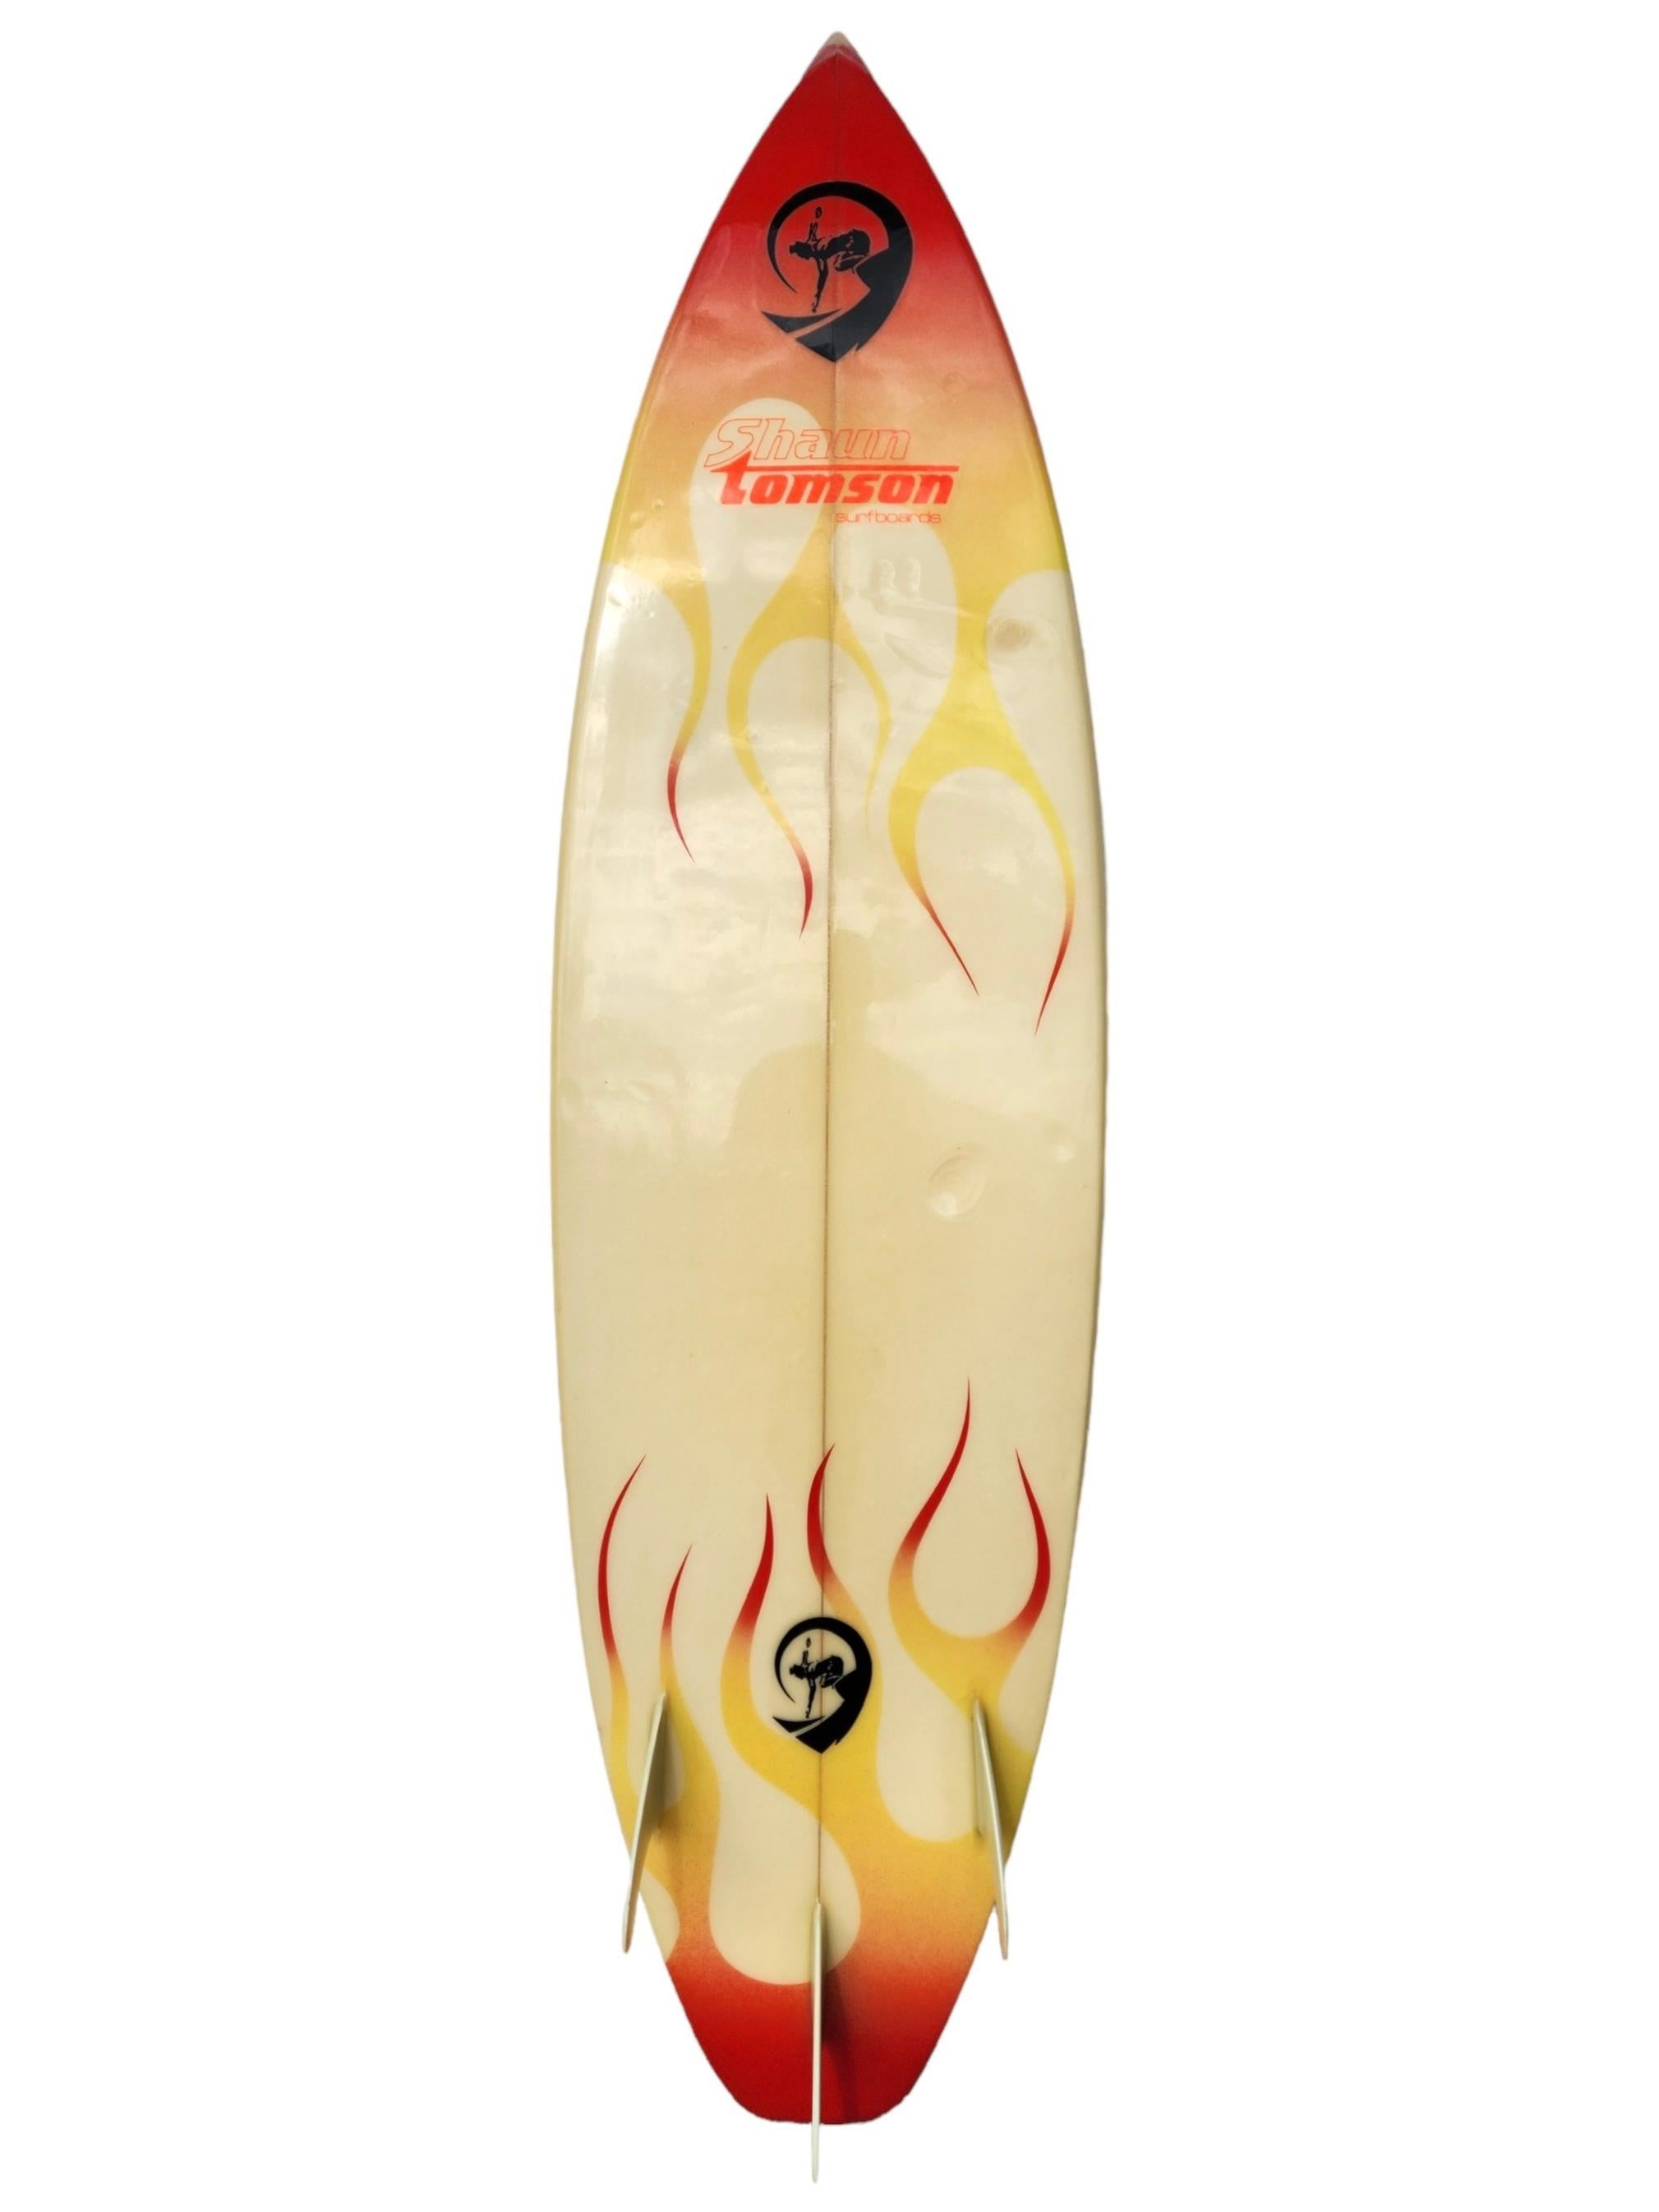 Mid-1980s Vintage Shaun Tomson surfboard made by Donald Kadowaki. Features flaming airbrush design, fixed thruster (tr-fin) setup, and squash tail. A remarkable example of a 1980s surfboard shaped under the renowned Shaun Tomson label, created by